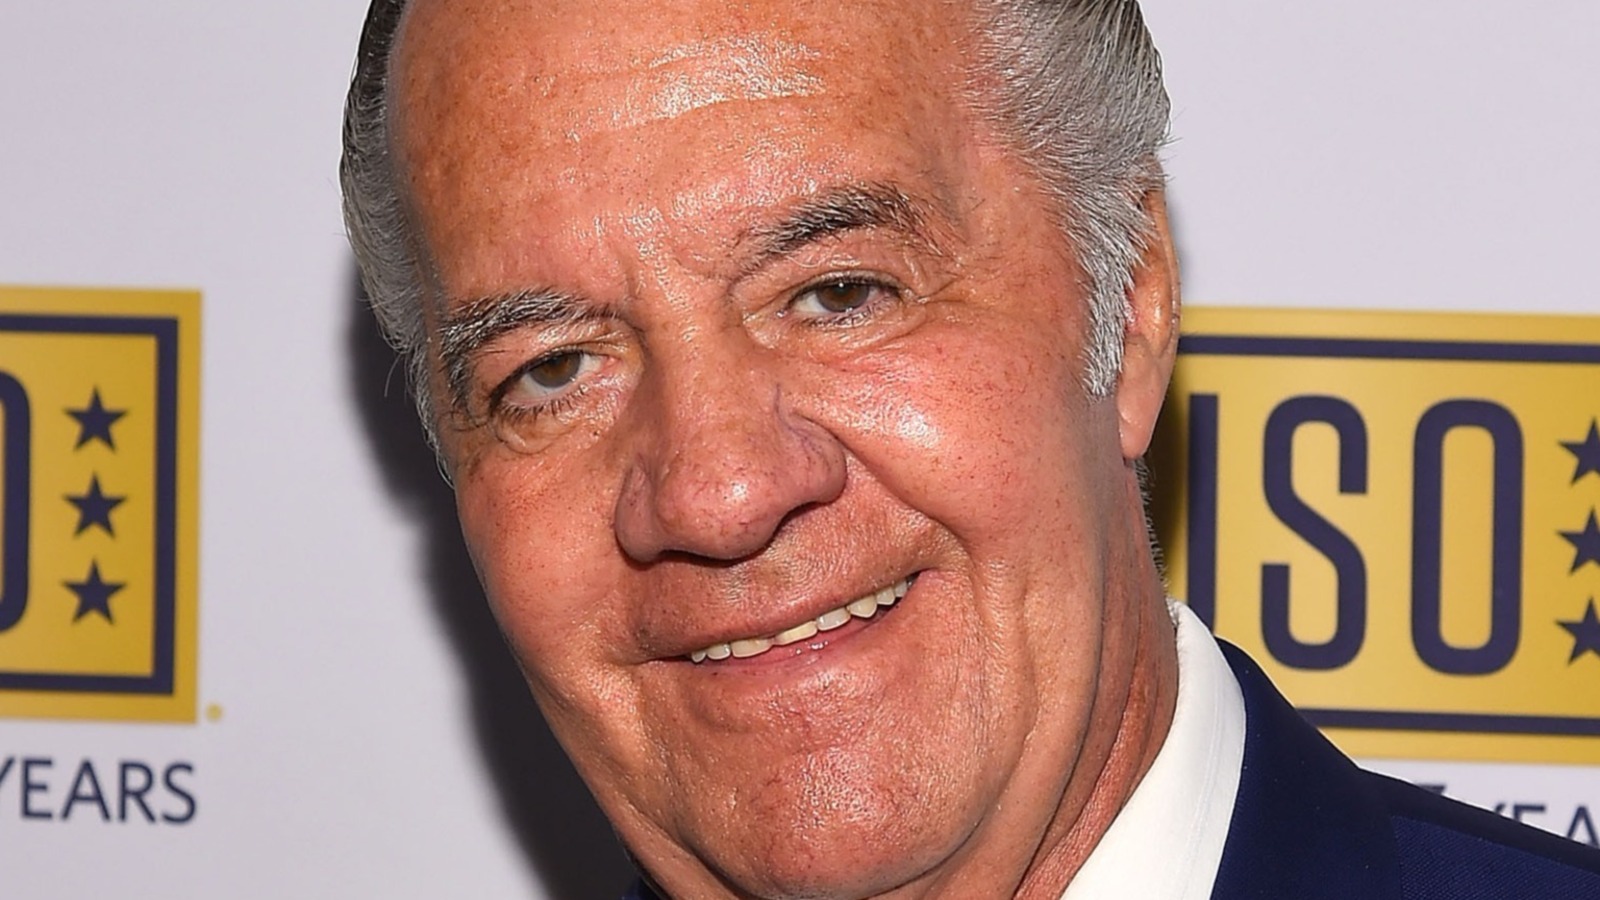 What Has Tony Sirico Been Up To Ever Since The Sopranos Ended?